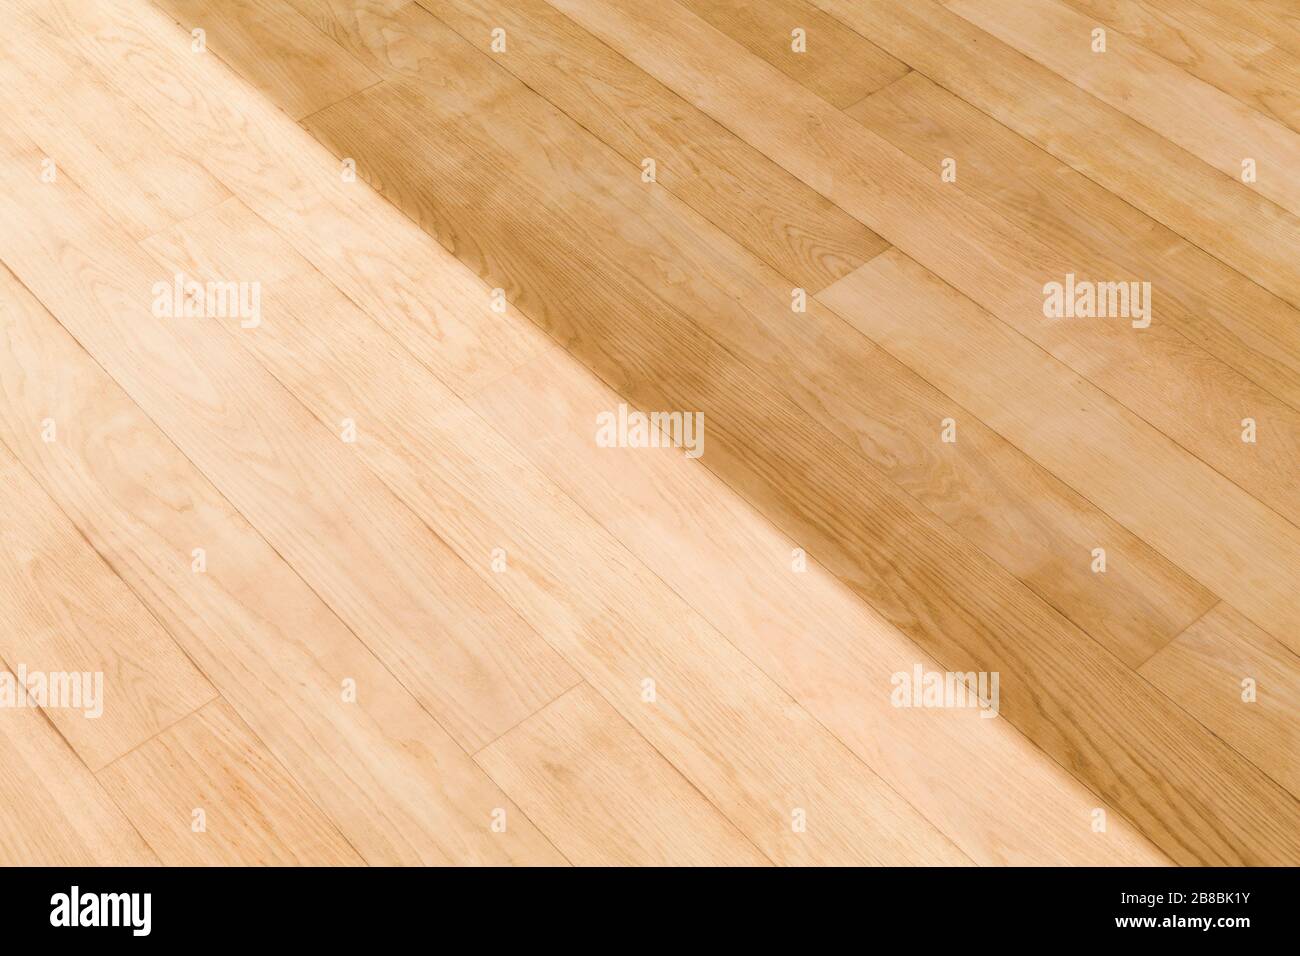 Sanding And Staining Or Waxing A Wood Floor In A Room Uk Stock